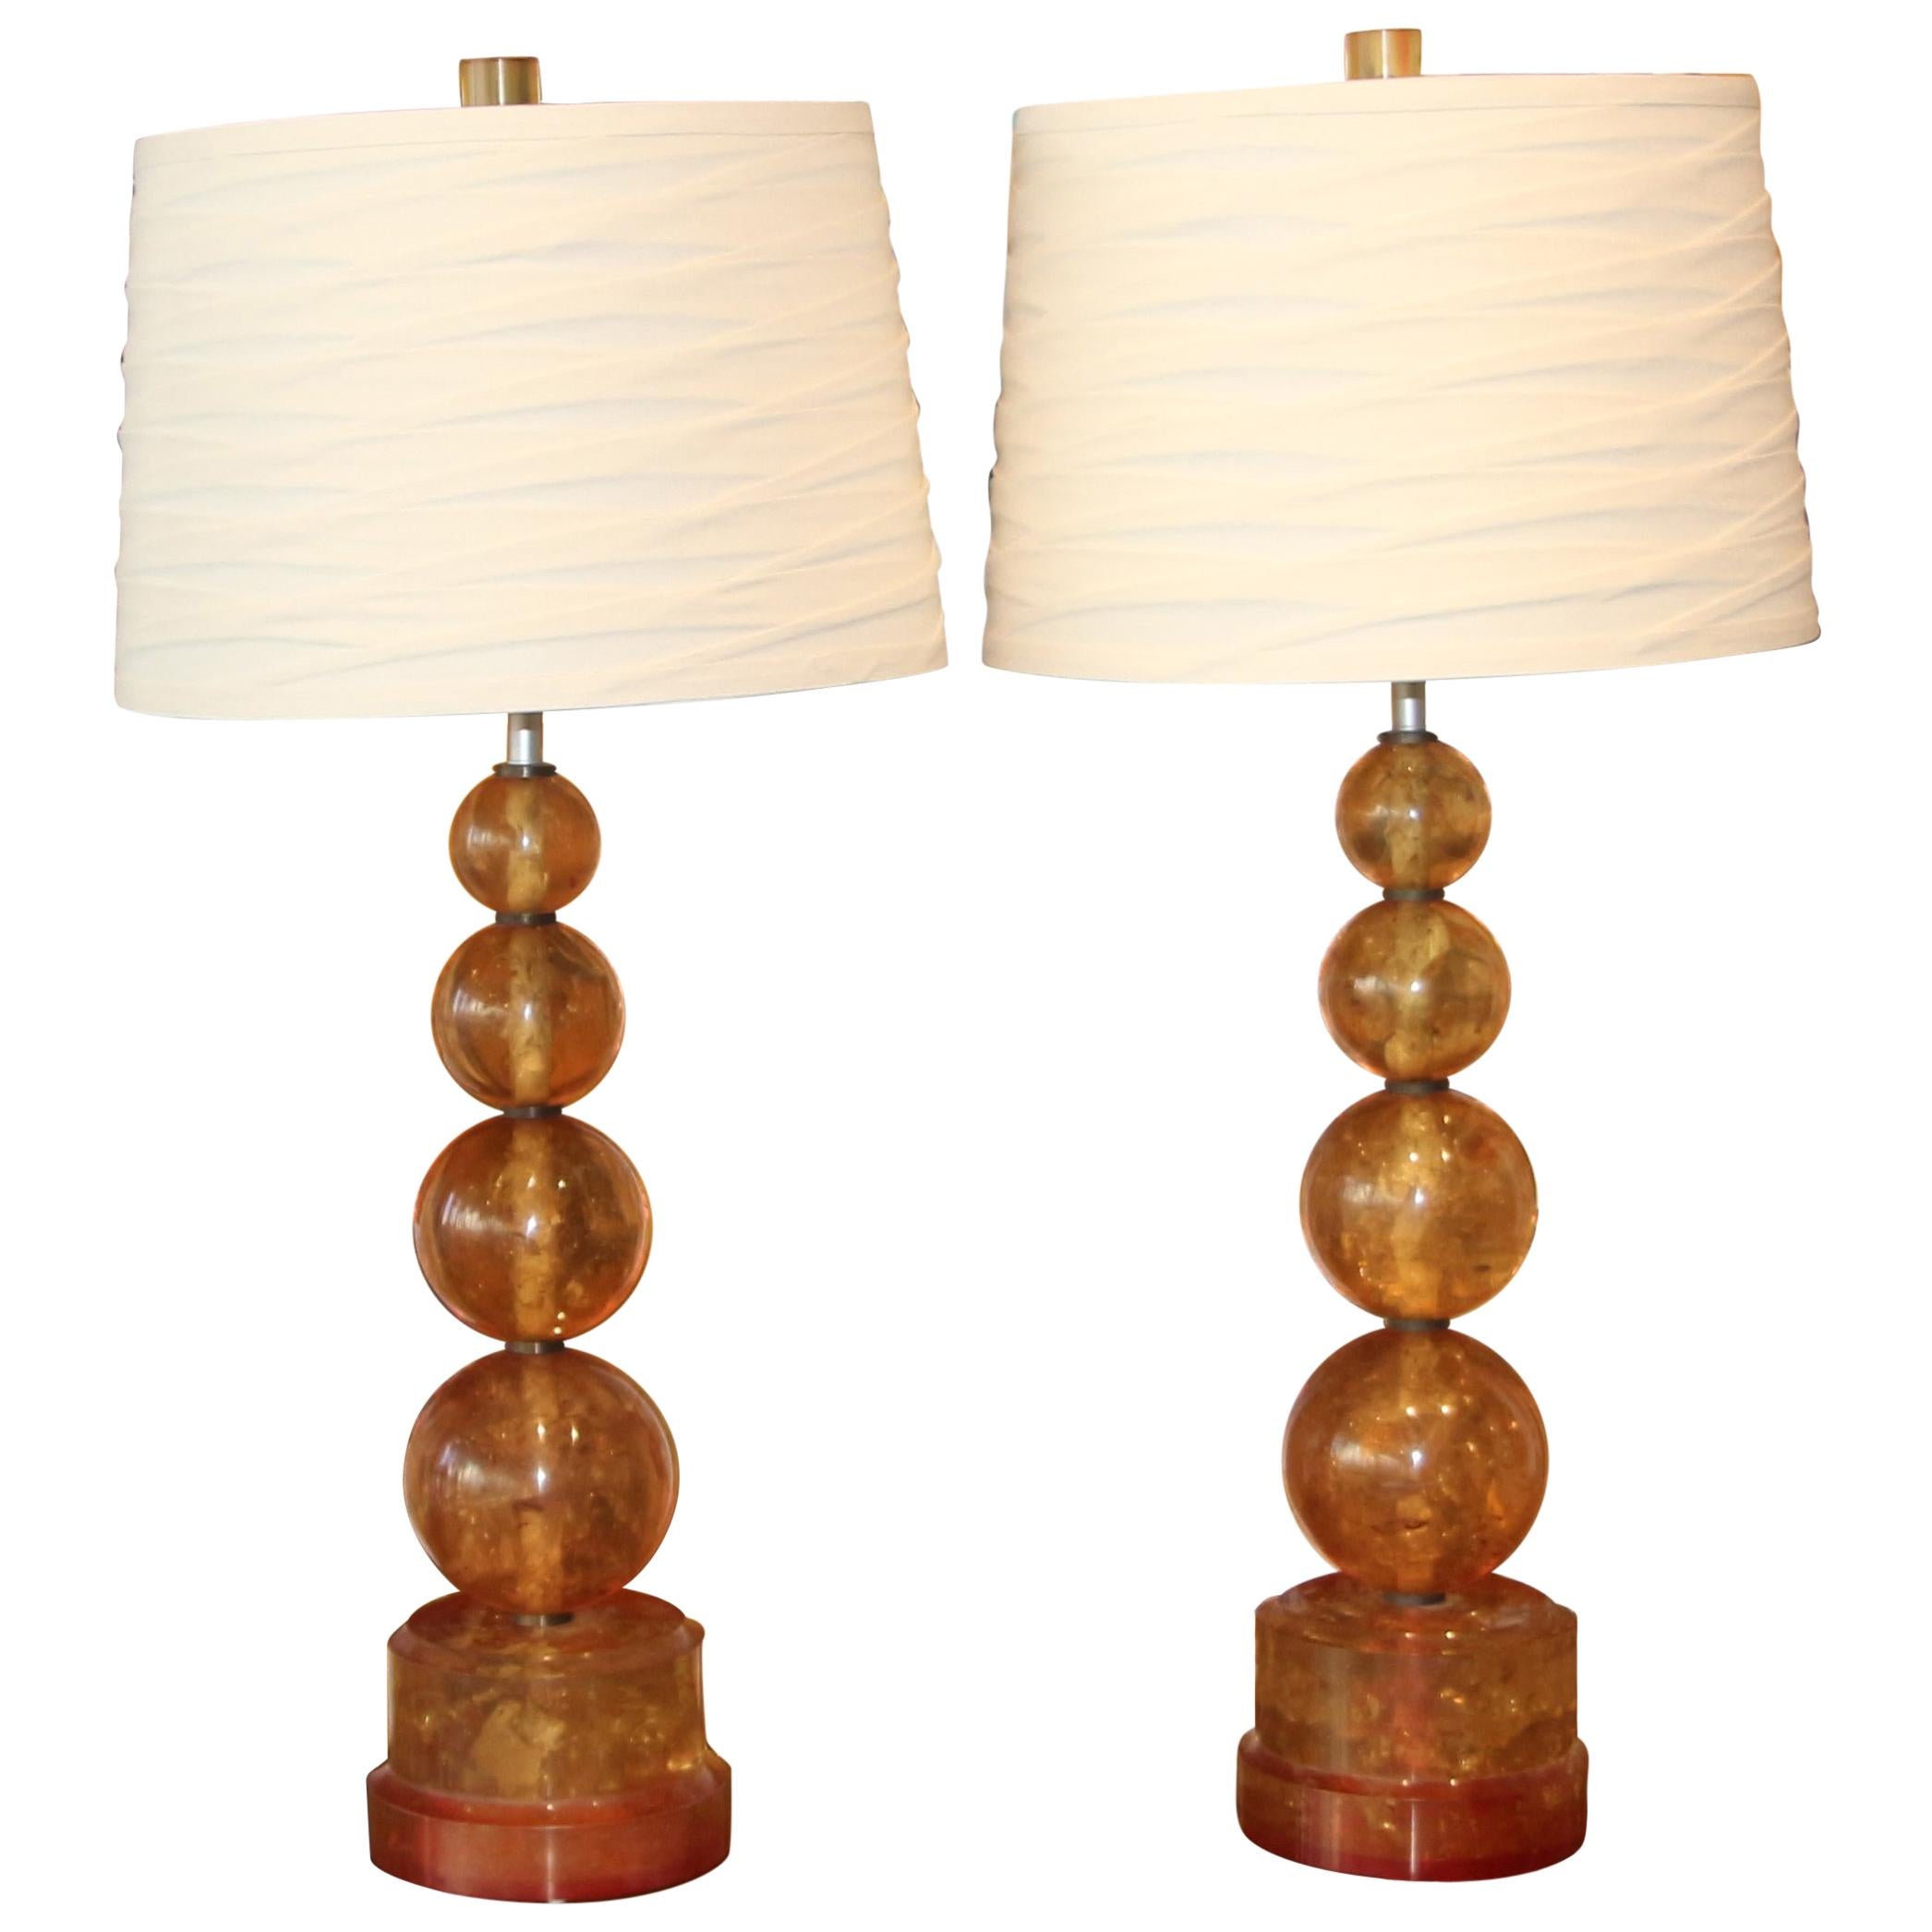 Vintage Pair of Amber Colored Fractured Resin Lamps